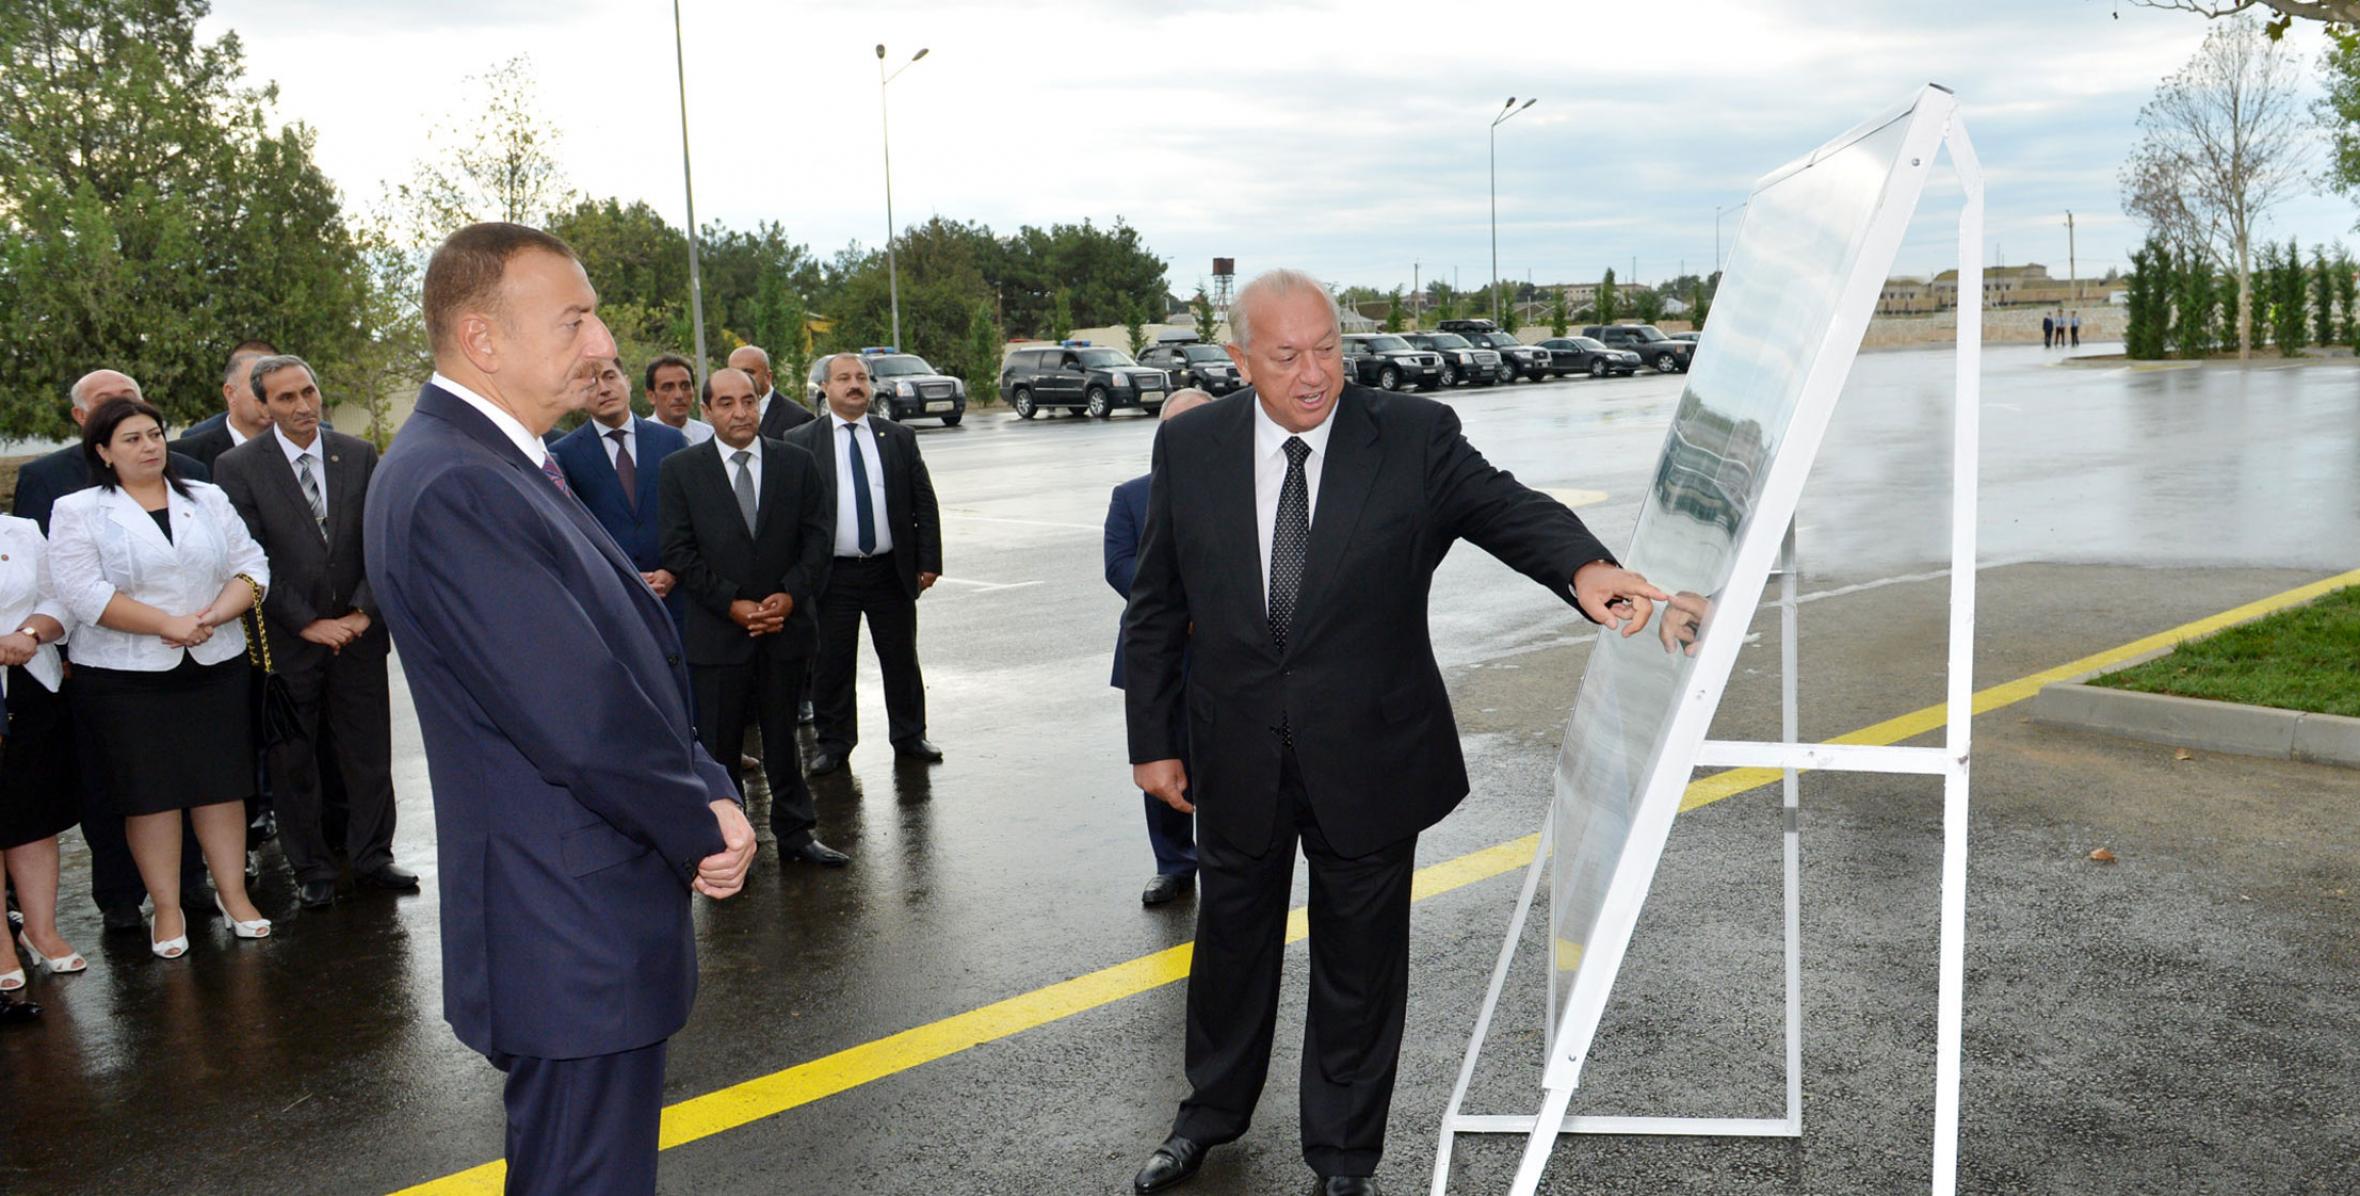 Ilham Aliyev attended the opening of the Yevlakh airport